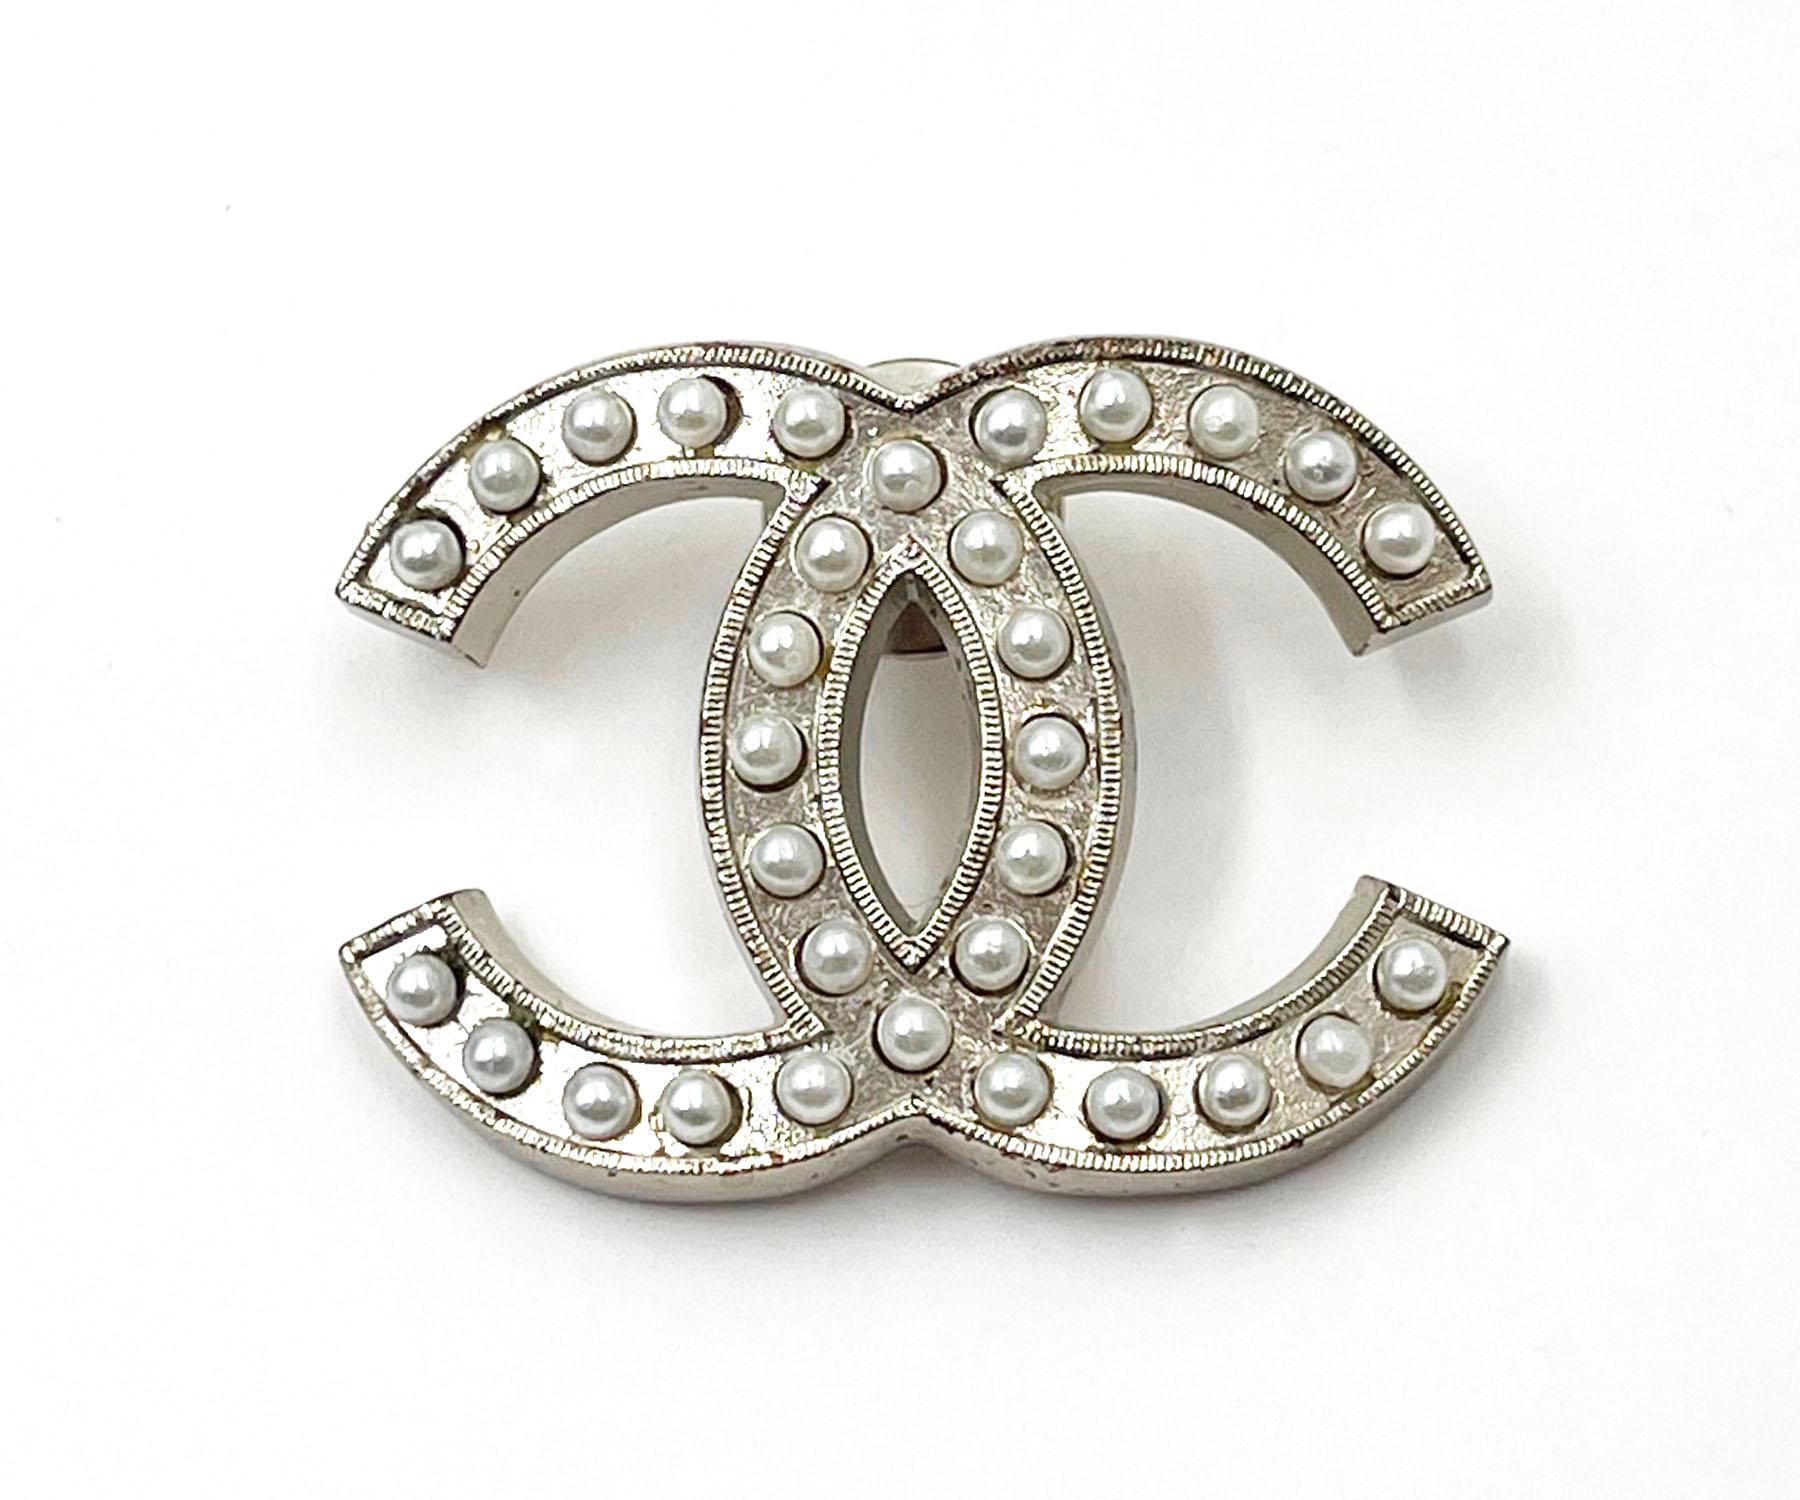 Chanel Silver CC Crystal Large Pin

* Marked 03
* Made in France

-It is approximately 1.75